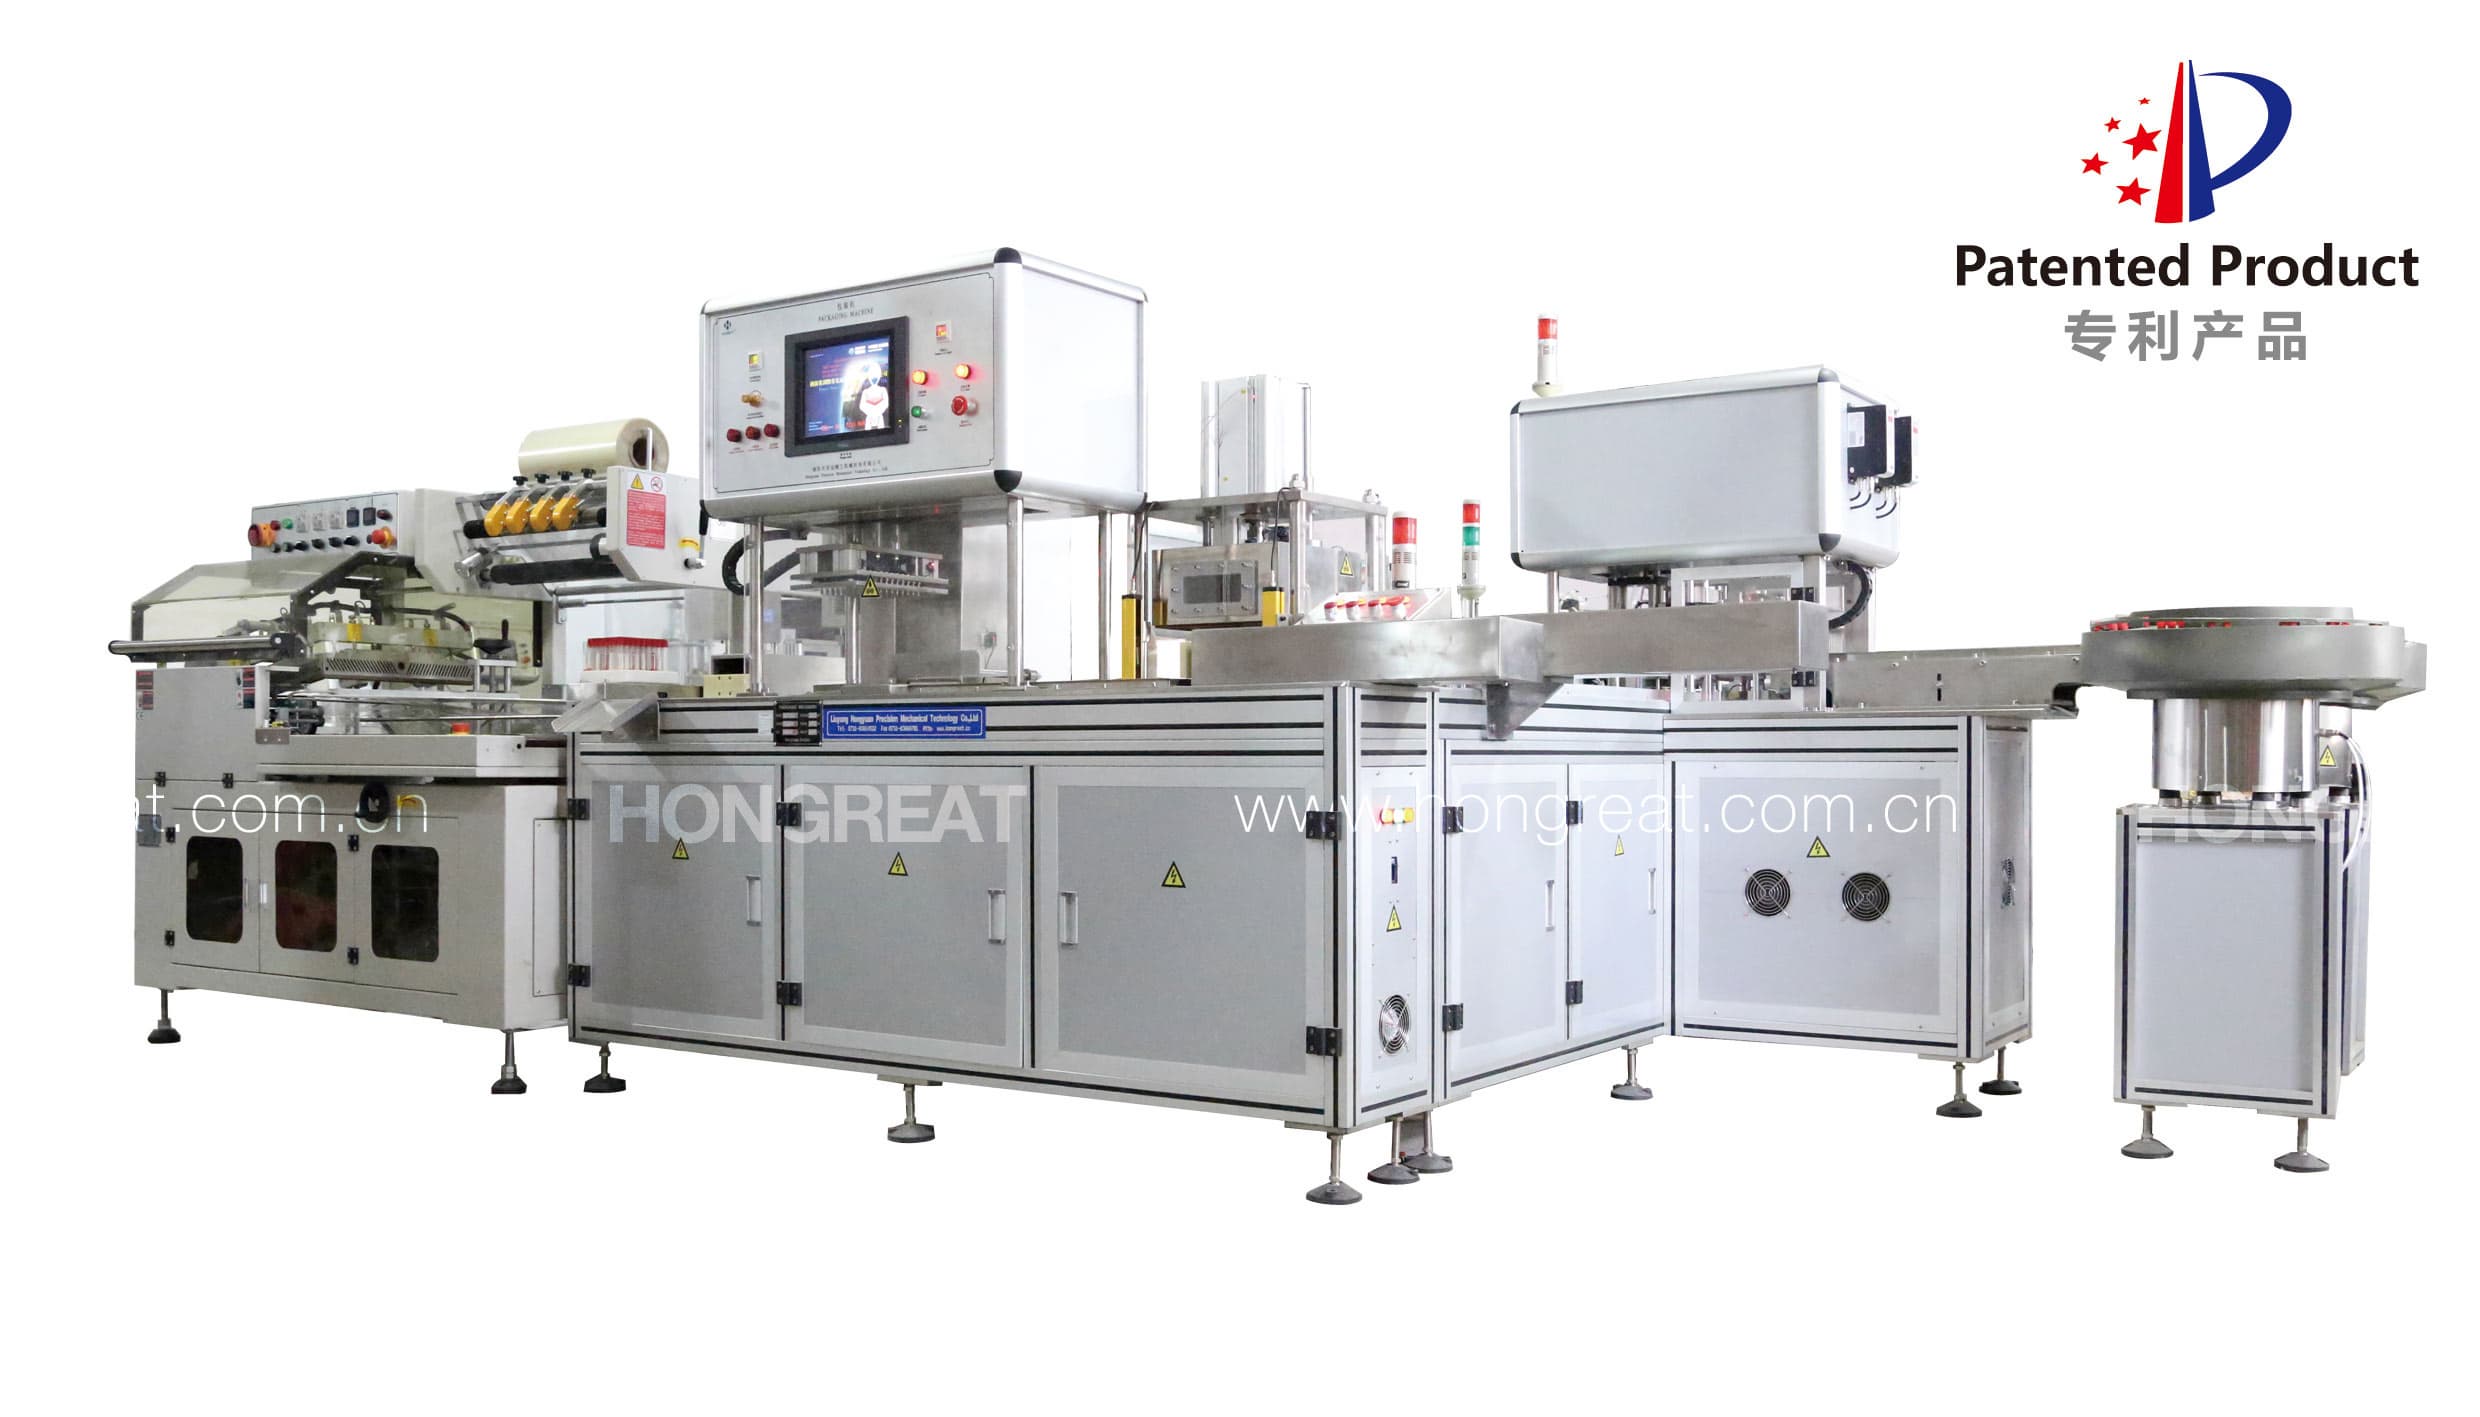 Hongreat EDTA BCA Blood Collection Tube Production Machine